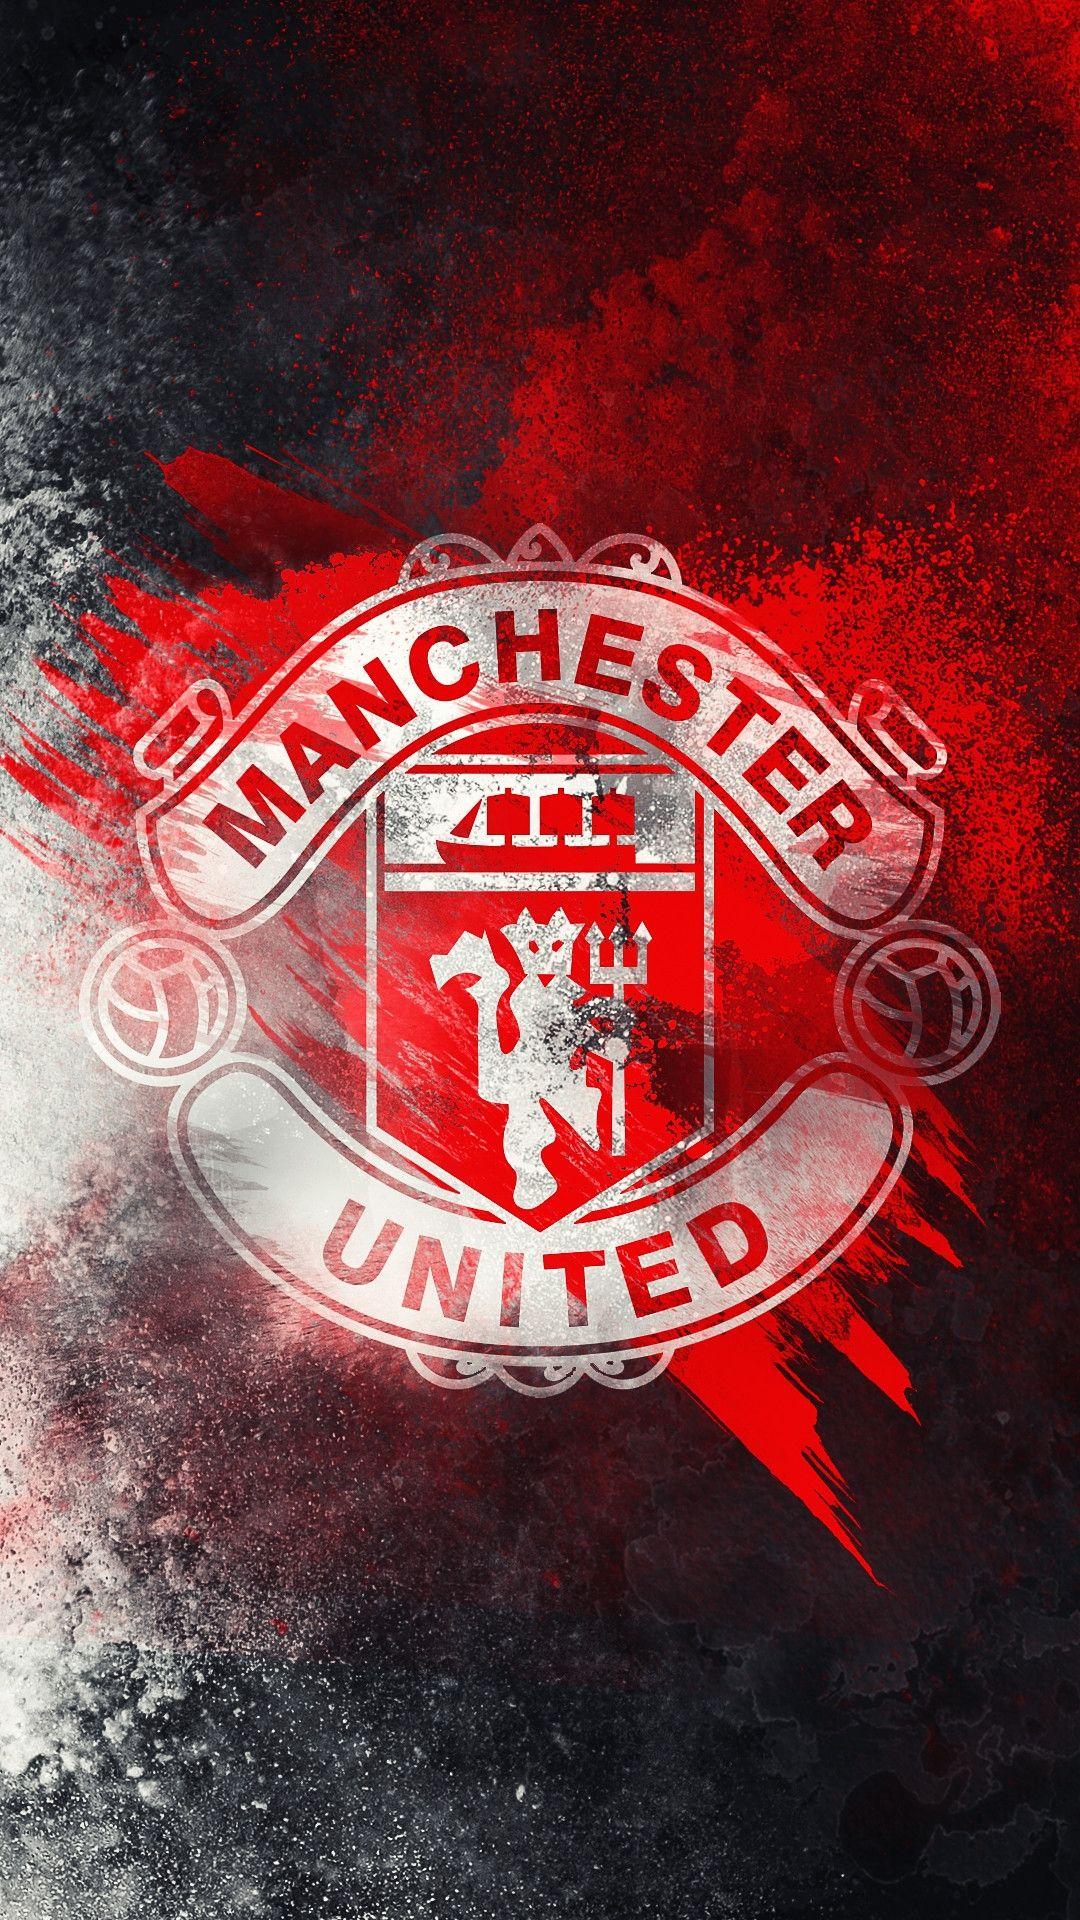 Best Of Manchester United Wallpaper HD 2017. Great Foofball Club